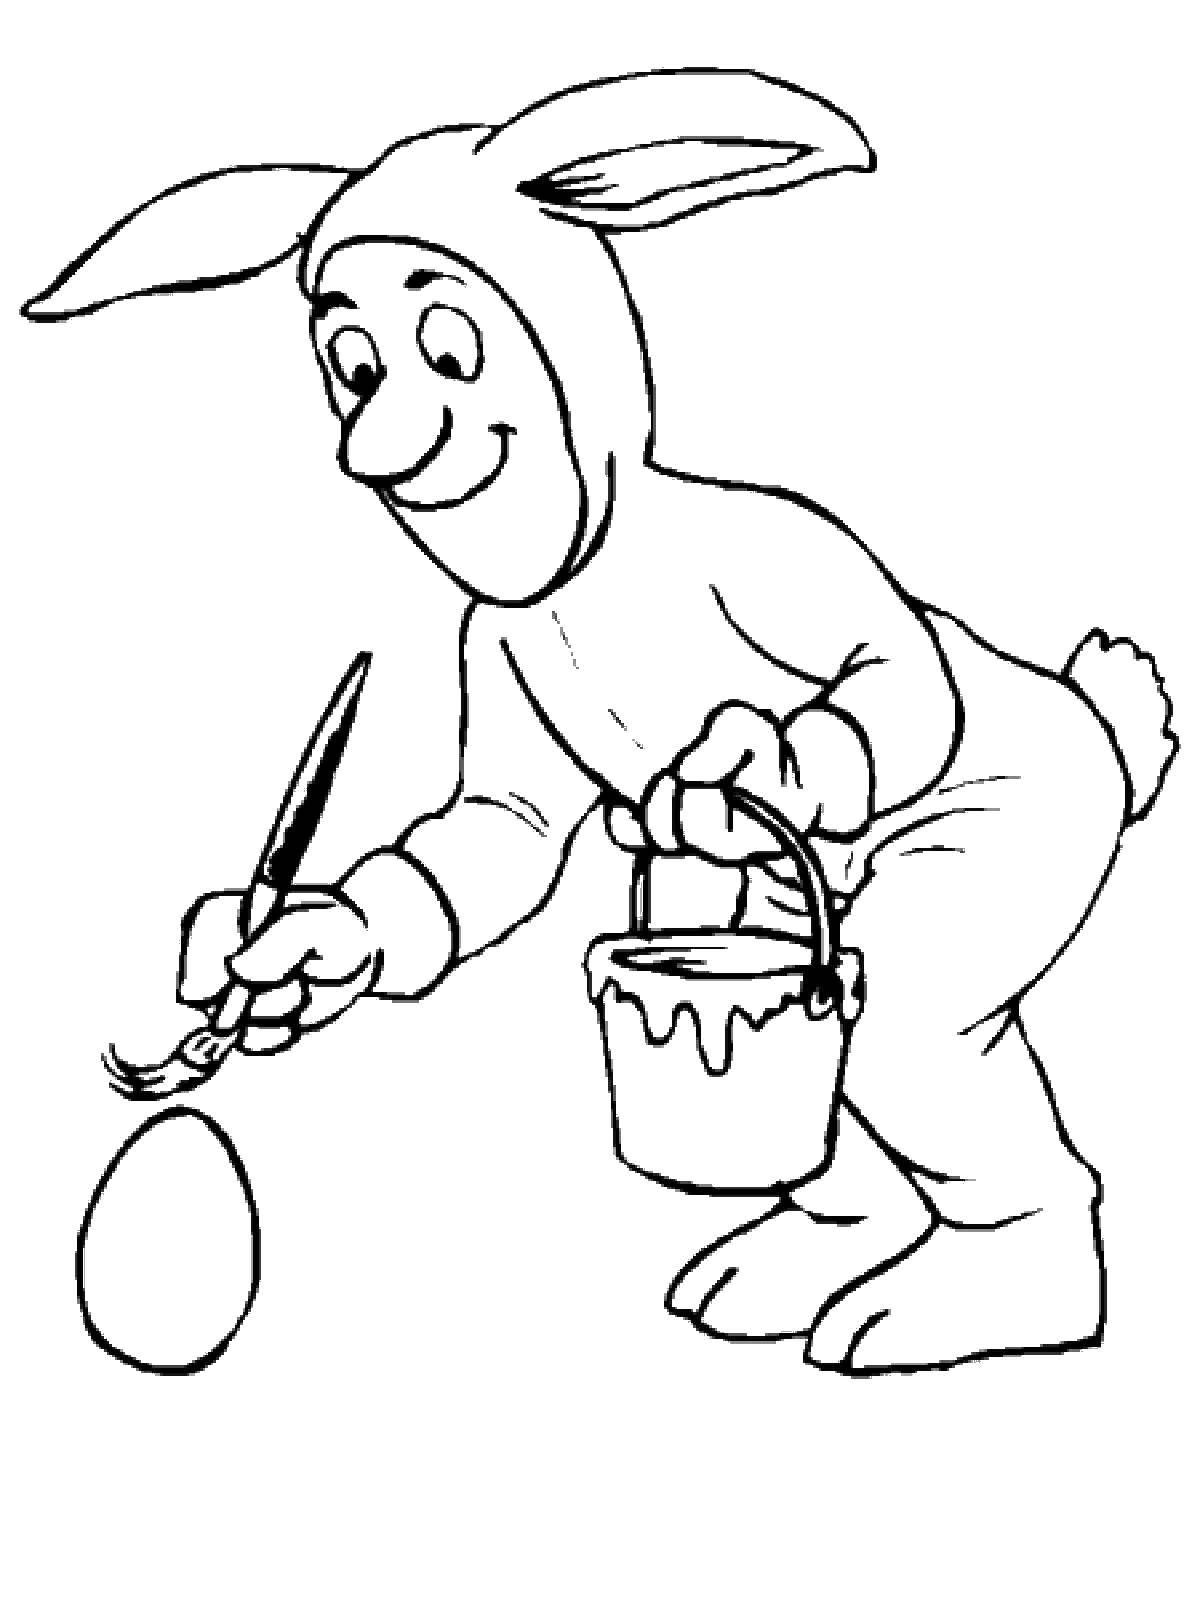 Coloring Dressed in Easter Bunny. Category coloring Easter. Tags:  The Easter Bunny, egg.